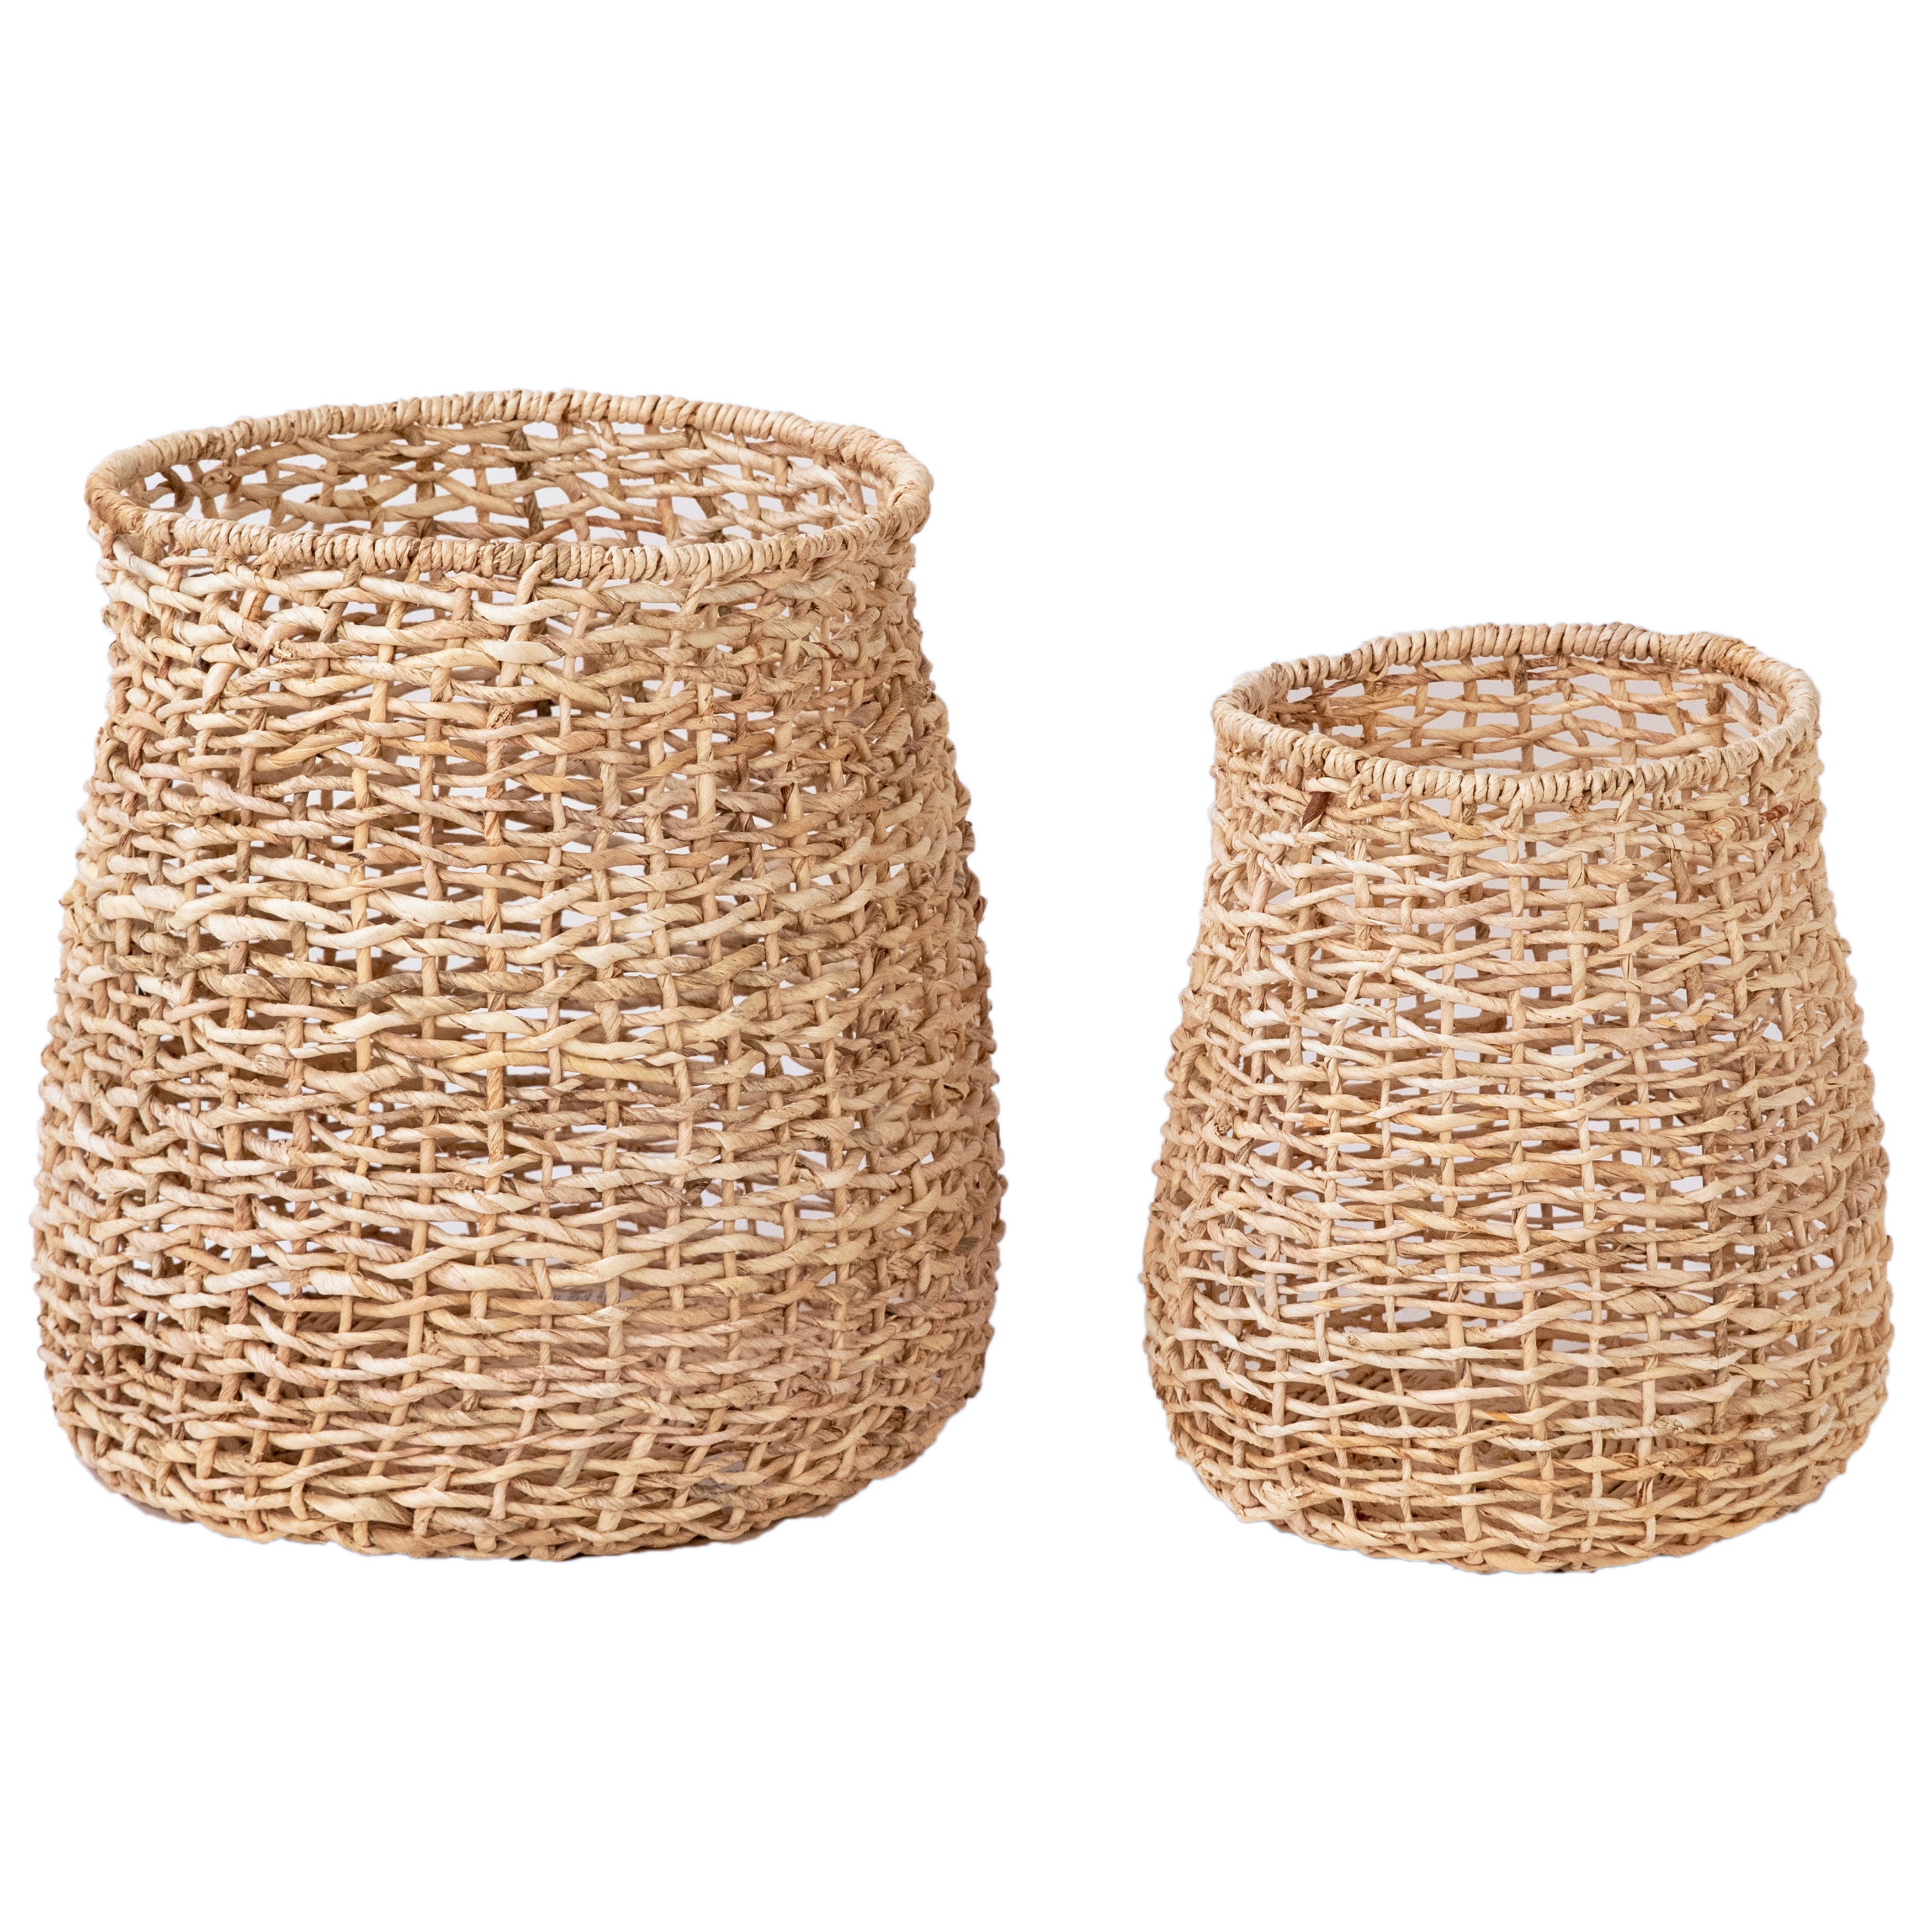 Create a warm and relaxed look in your home with this set of decorative baskets. These baskets are crafted from natural, hand-braided Abaca fibers, a durable material known for its exceptional strength and flexibility. With their organic and subtle expression, these baskets will make a stunning addition to a laundry room or bathroom. Amethyst Home provides interior design, new home construction design consulting, vintage area rugs, and lighting in the Miami metro area.